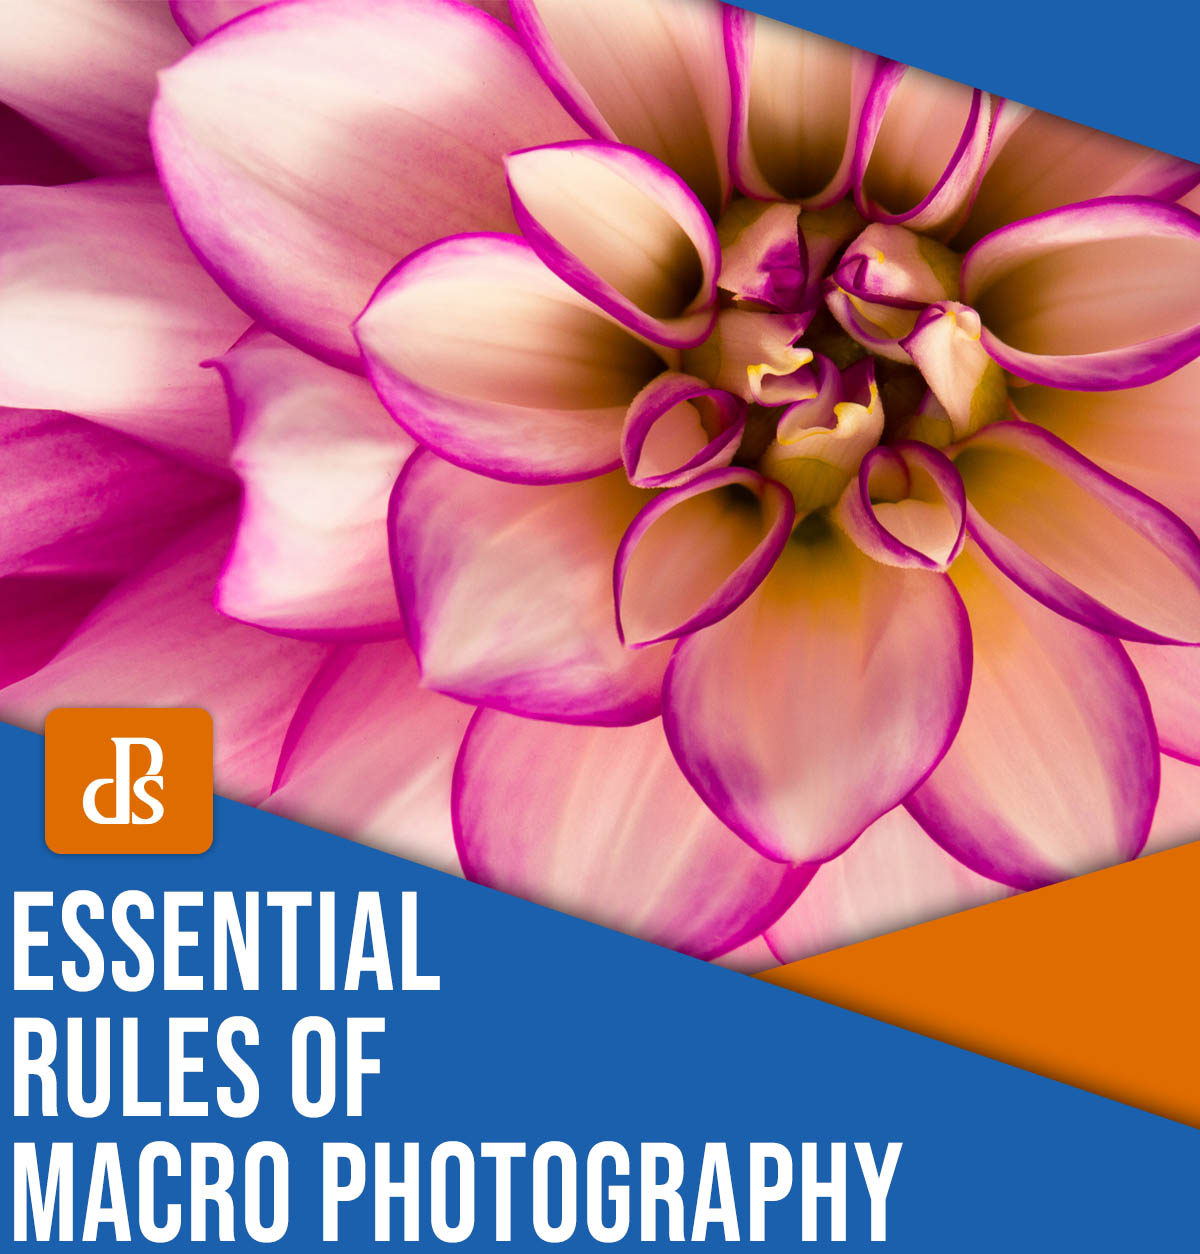 Essential rules of macro photography